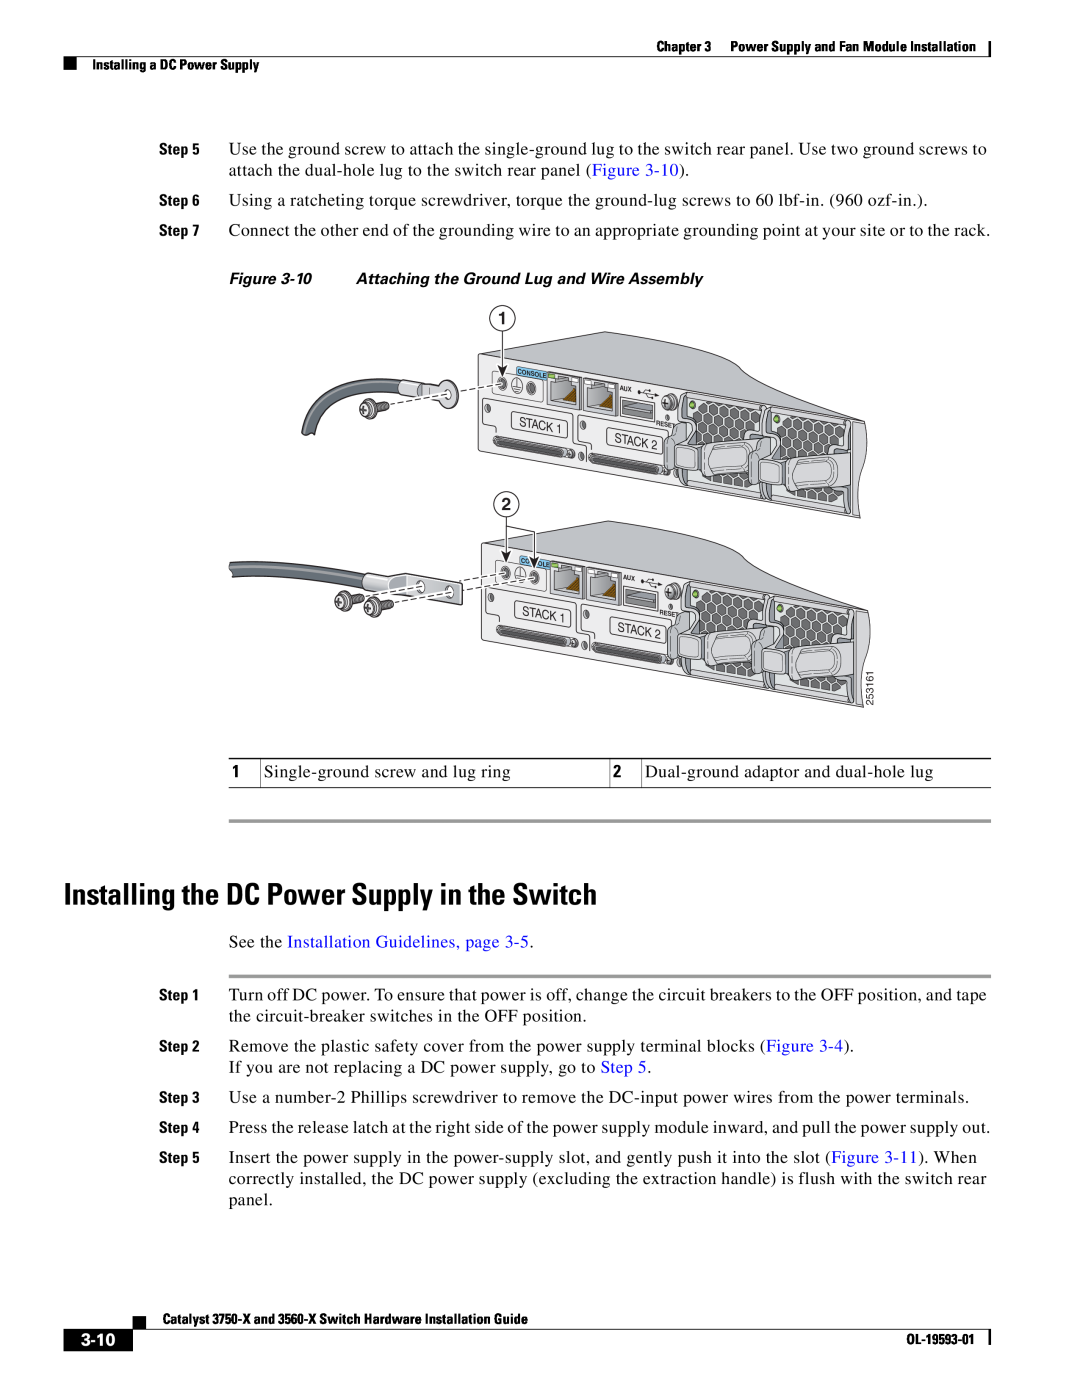 Cisco Systems 3750-X, 3560-X Installing the DC Power Supply in the Switch, See the Installation Guidelines, page, 3-10 